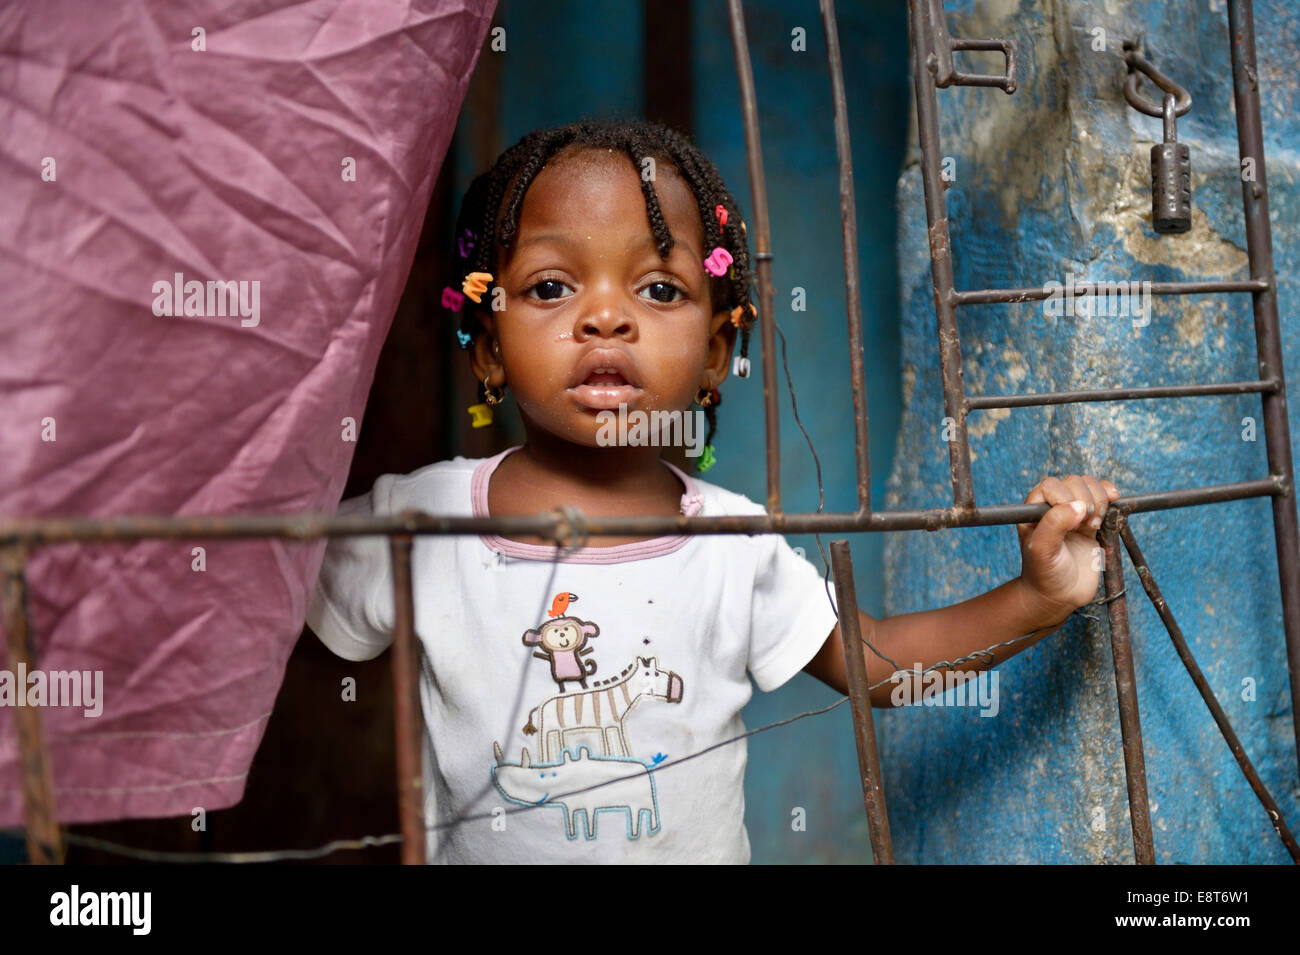 Girl behind a fence in a doorway, Fort National slum, Port-au-Prince, Haiti Stock Photo